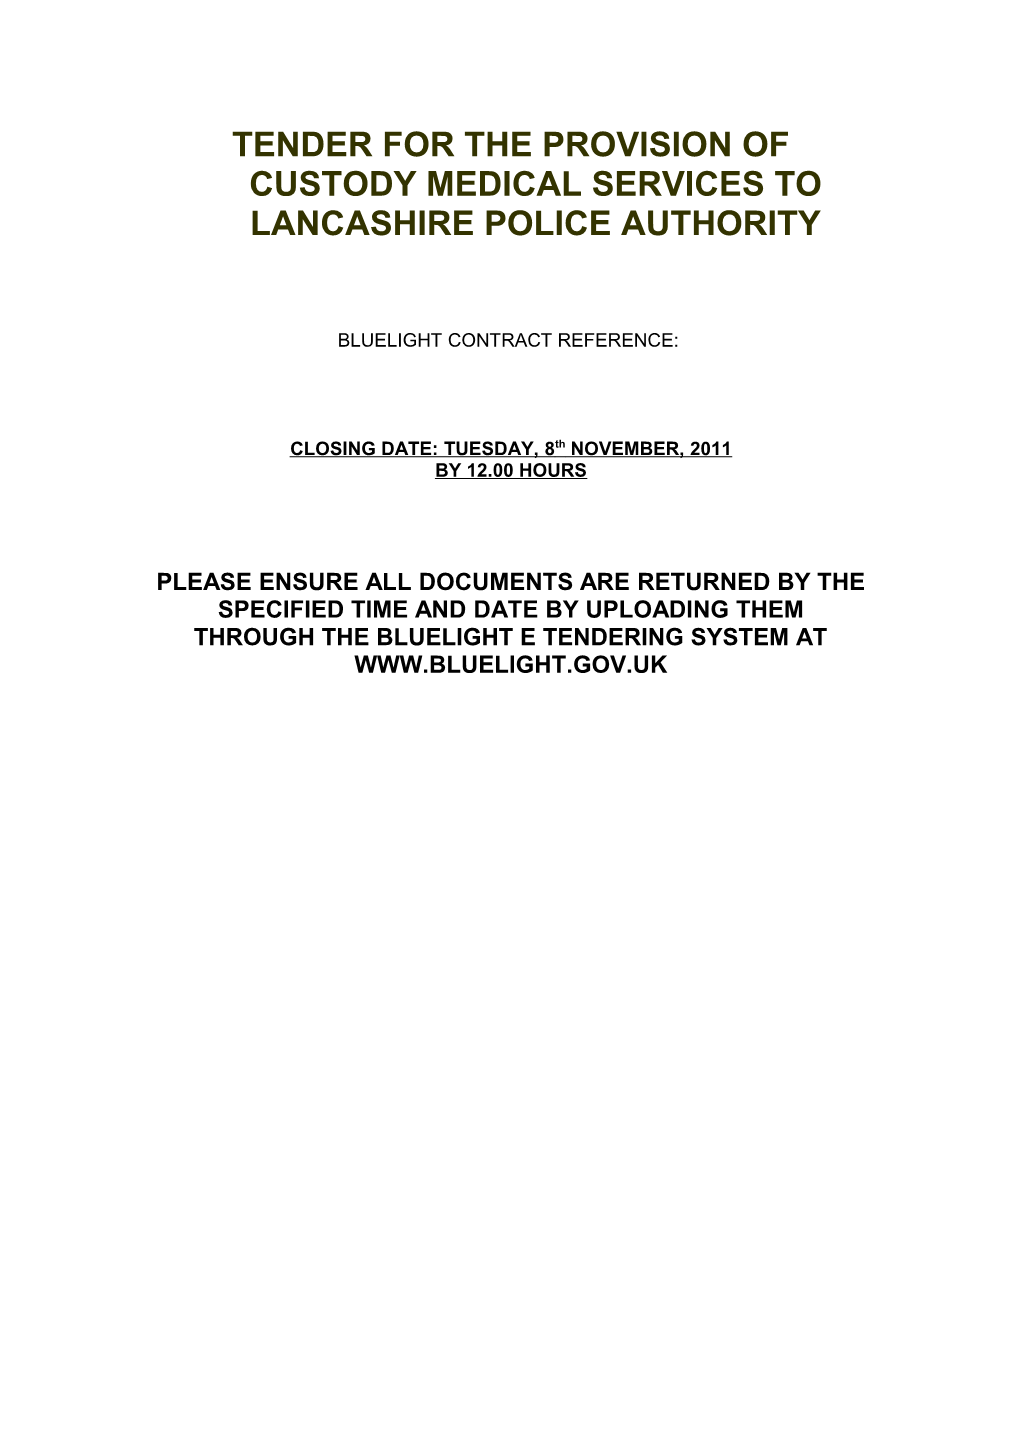 Tender for the Provision of Custody Medical Services to Lancashire Police Authority